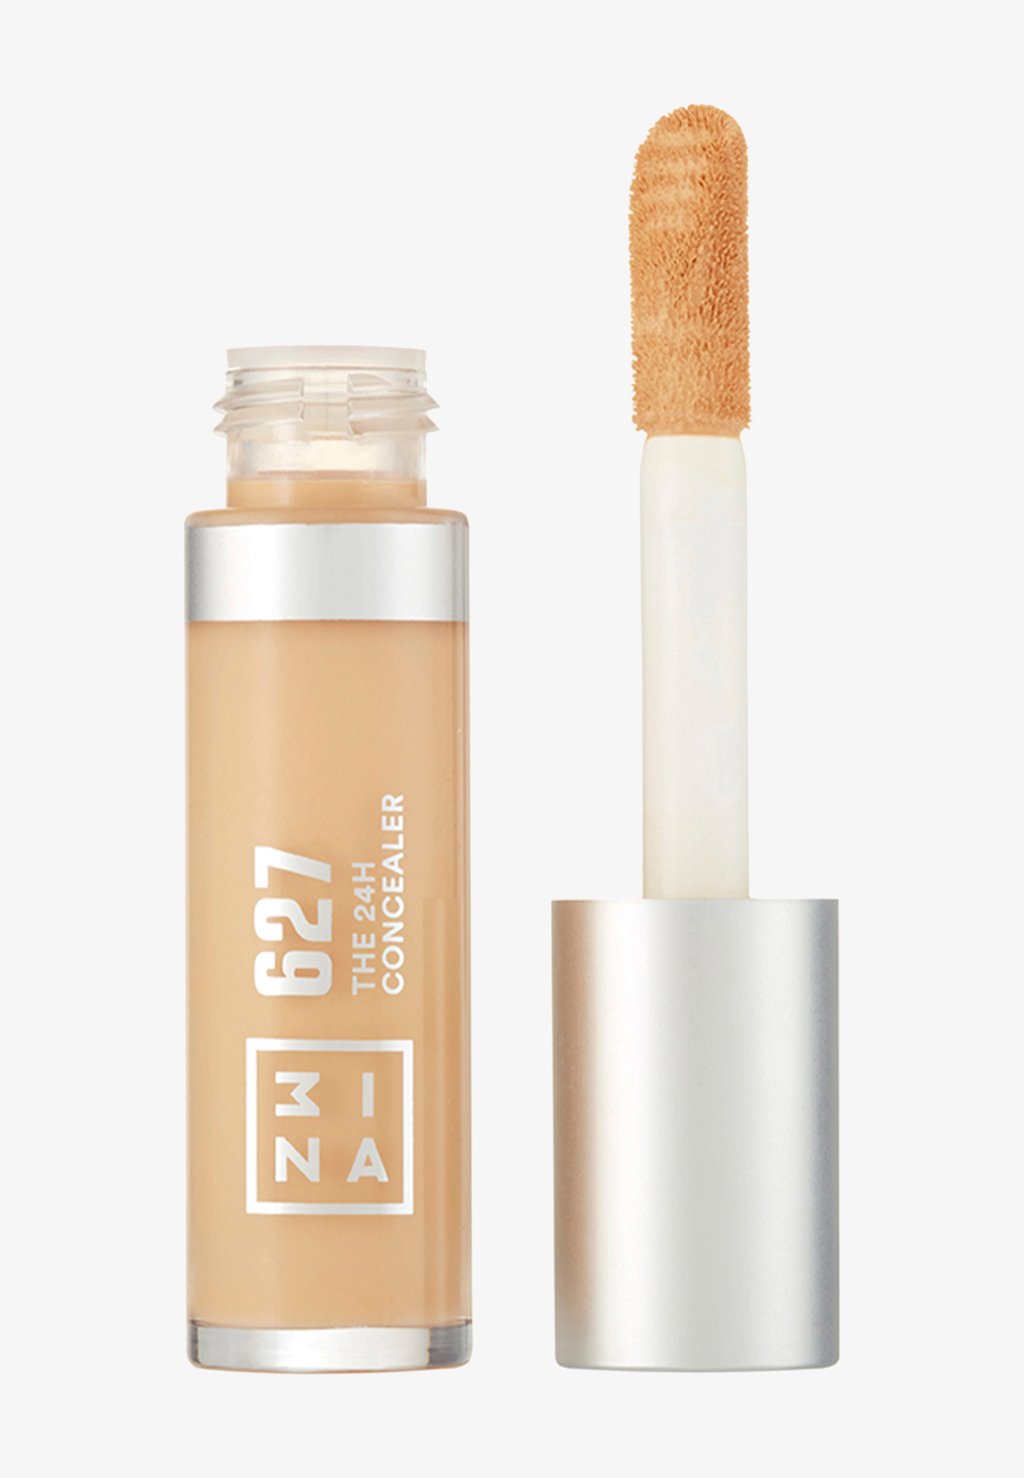 Консилер The 24H Concealer 3ina, цвет 627 ultra light nude 3ina the 24h concealer оттенок 627 1